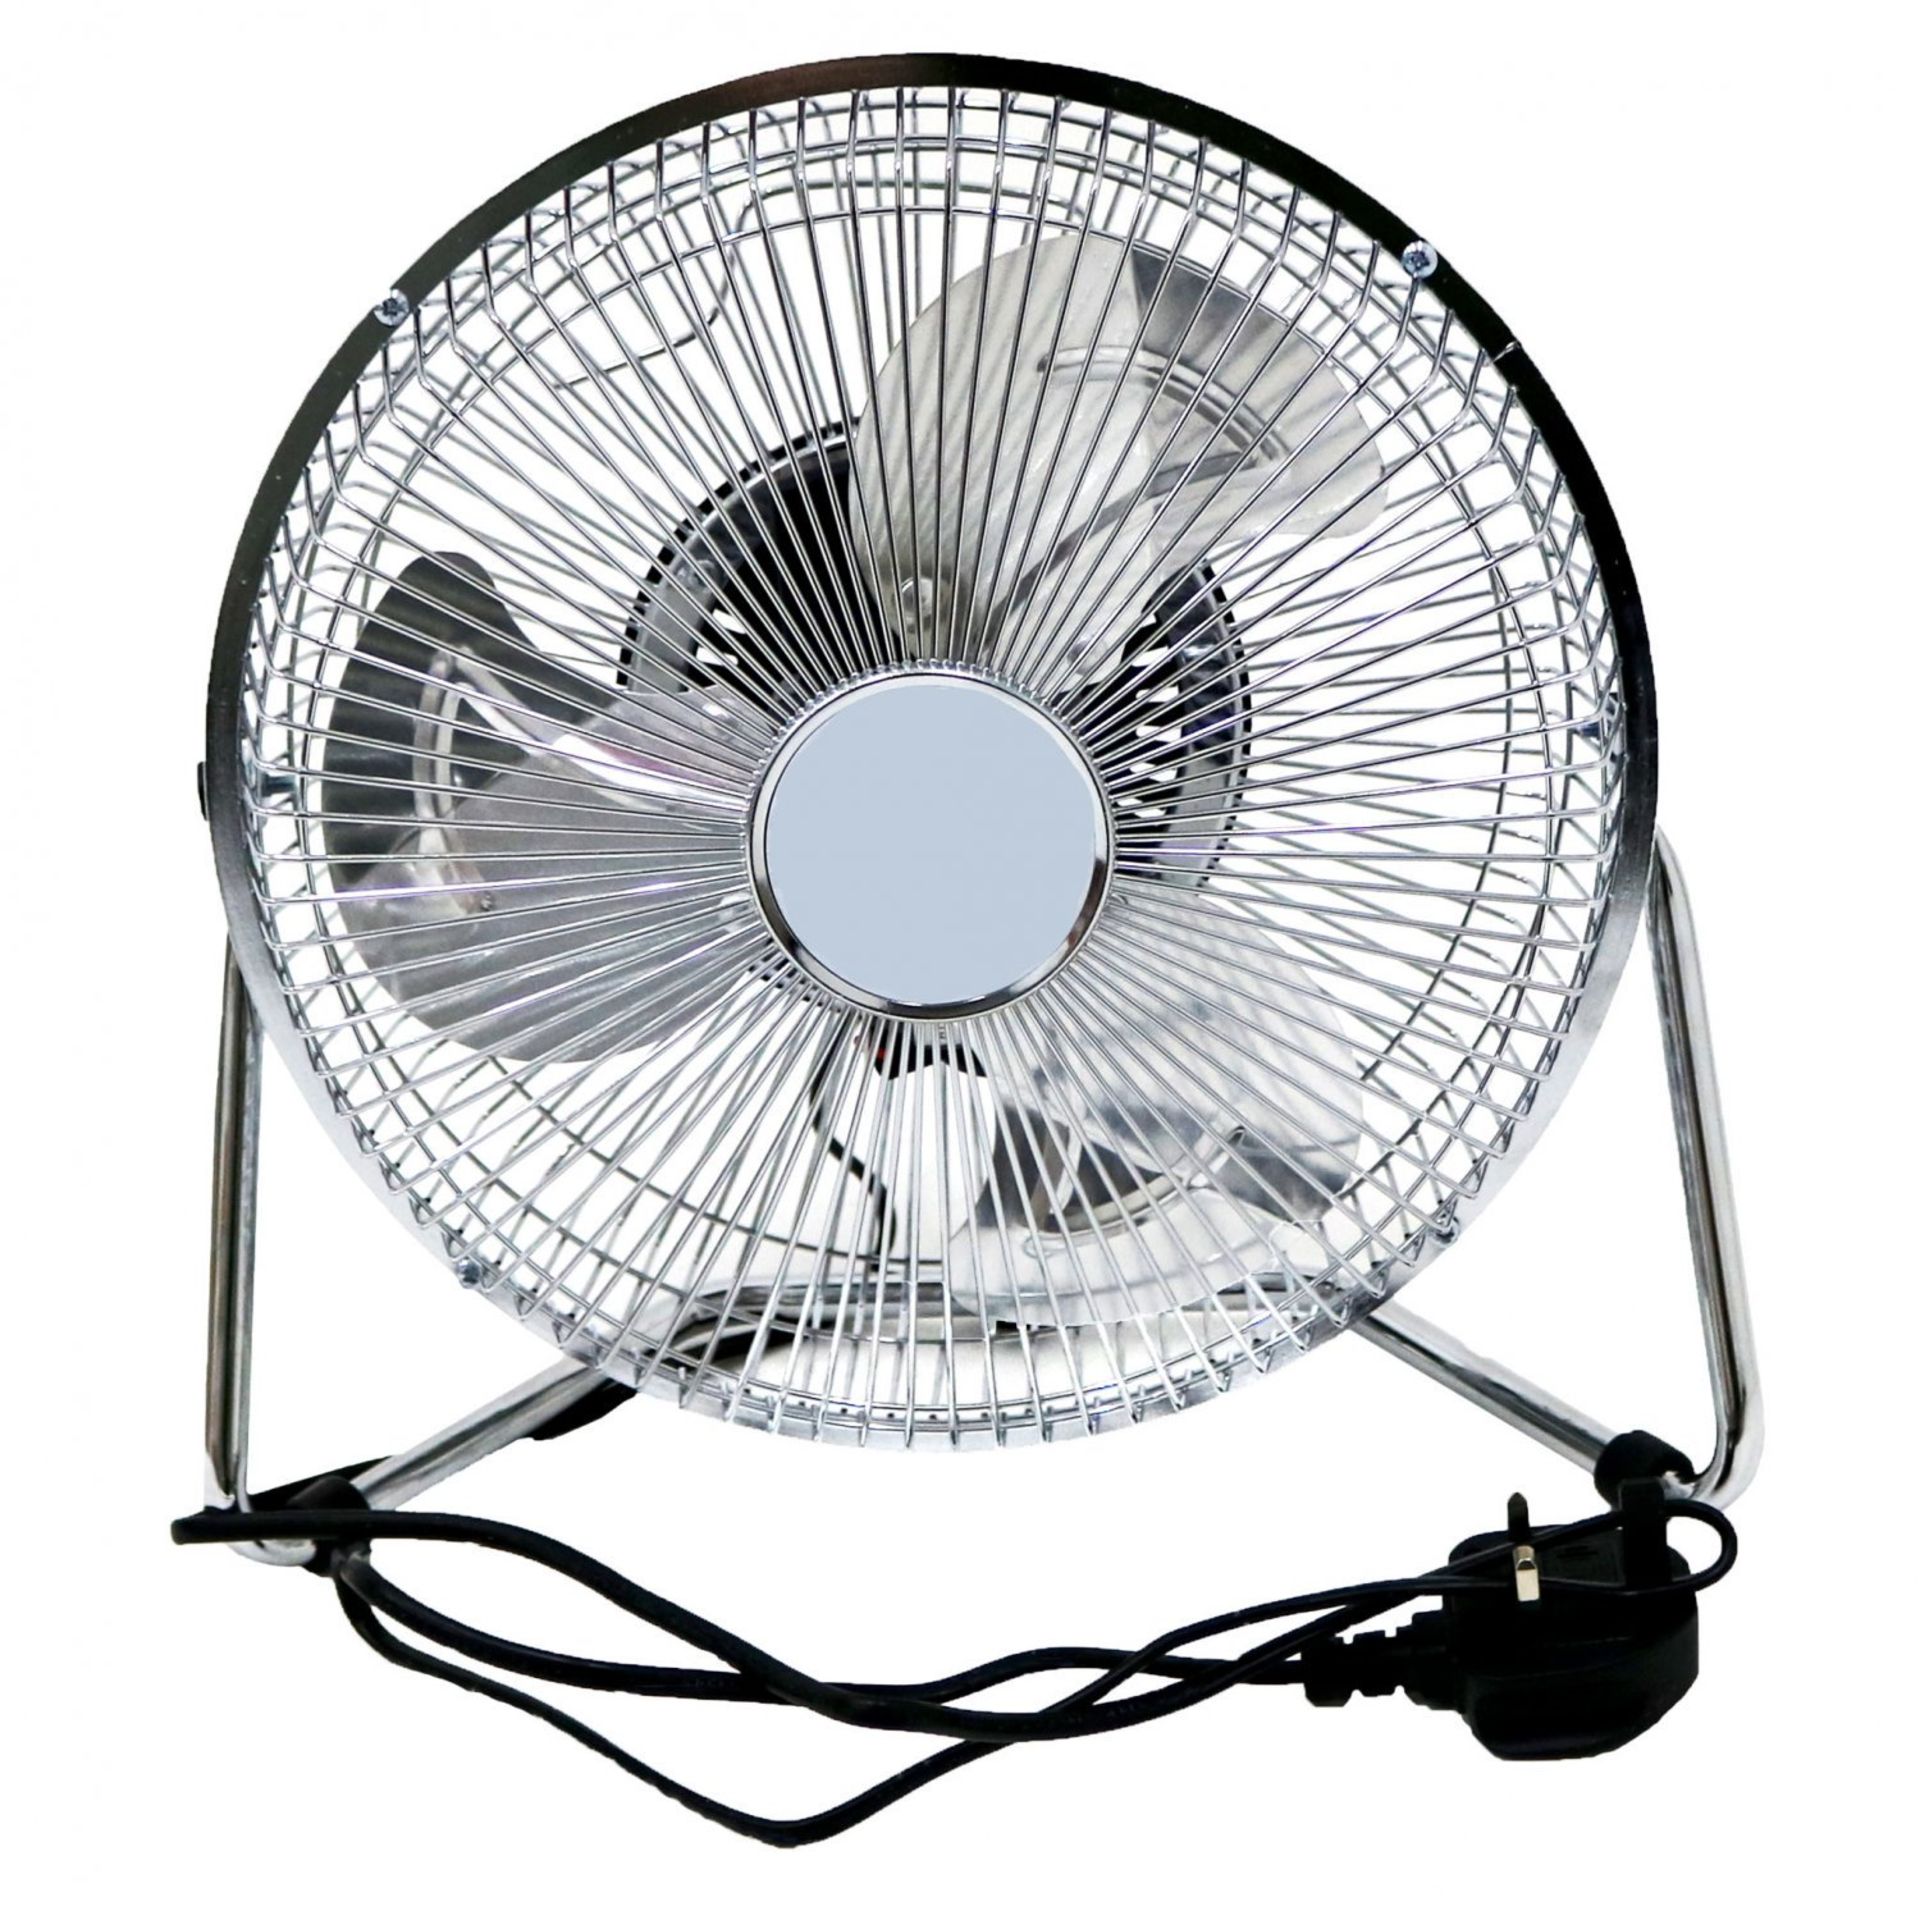 (KK9) 9" Inch Chrome 3 Speed Floor Standing Gym Fan Hydroponic Stay cool this year with the ... - Image 2 of 2